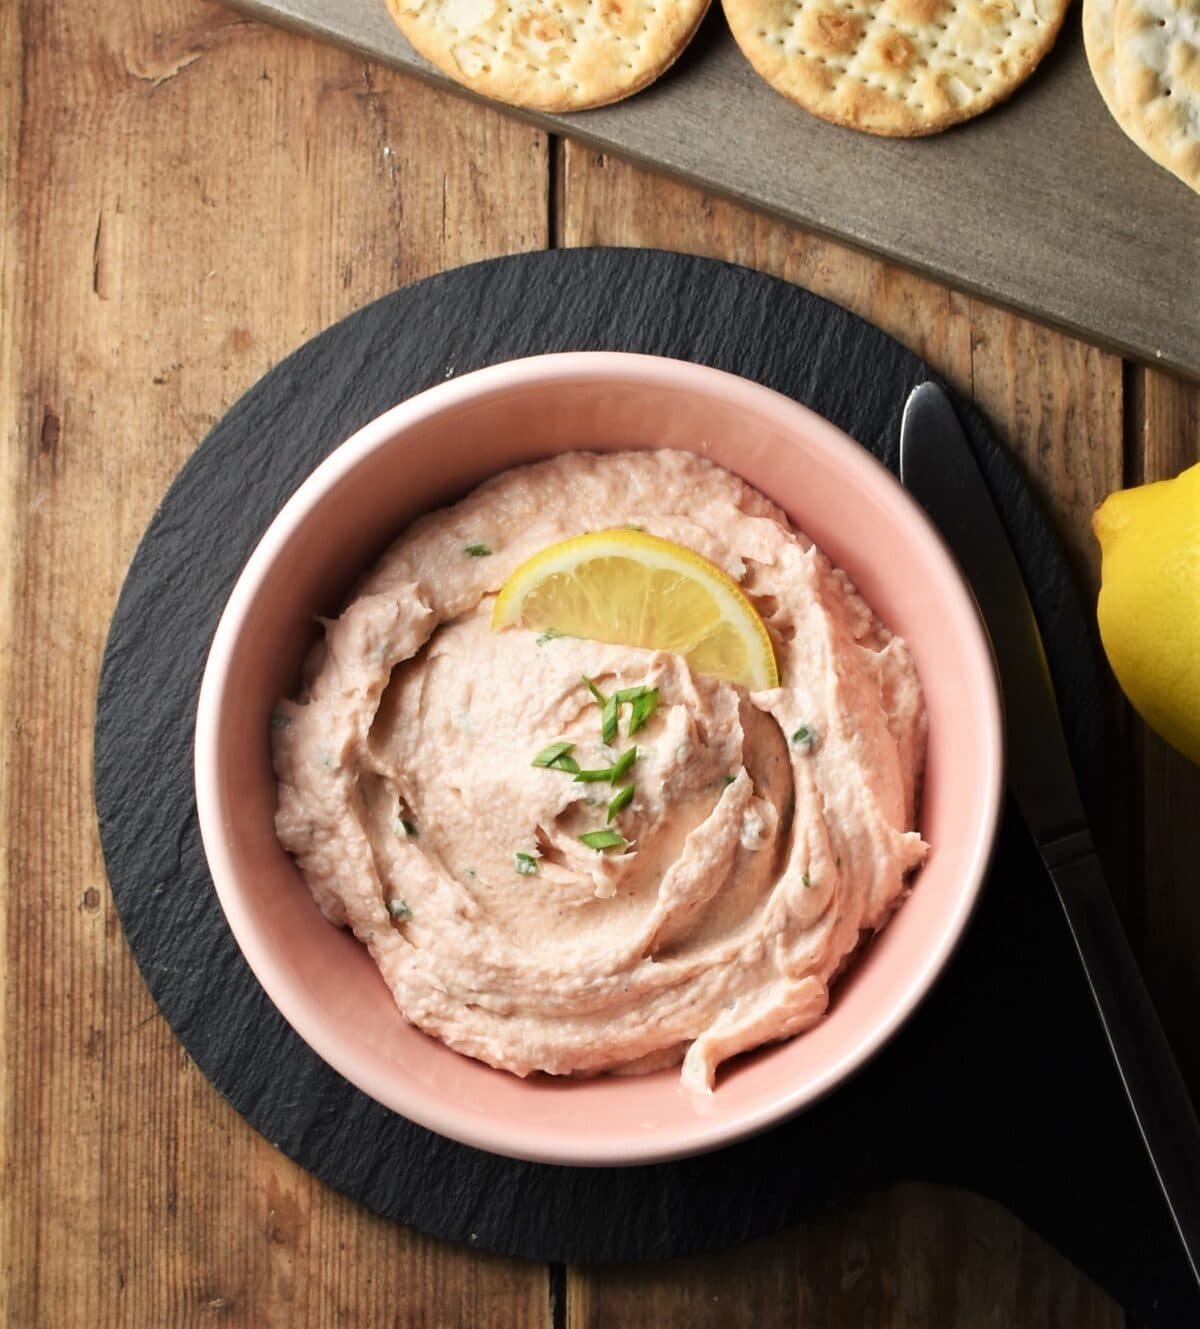 Creamy salmon spread with lemon slice in pink bowl on black plate with crackers and lemon in background.